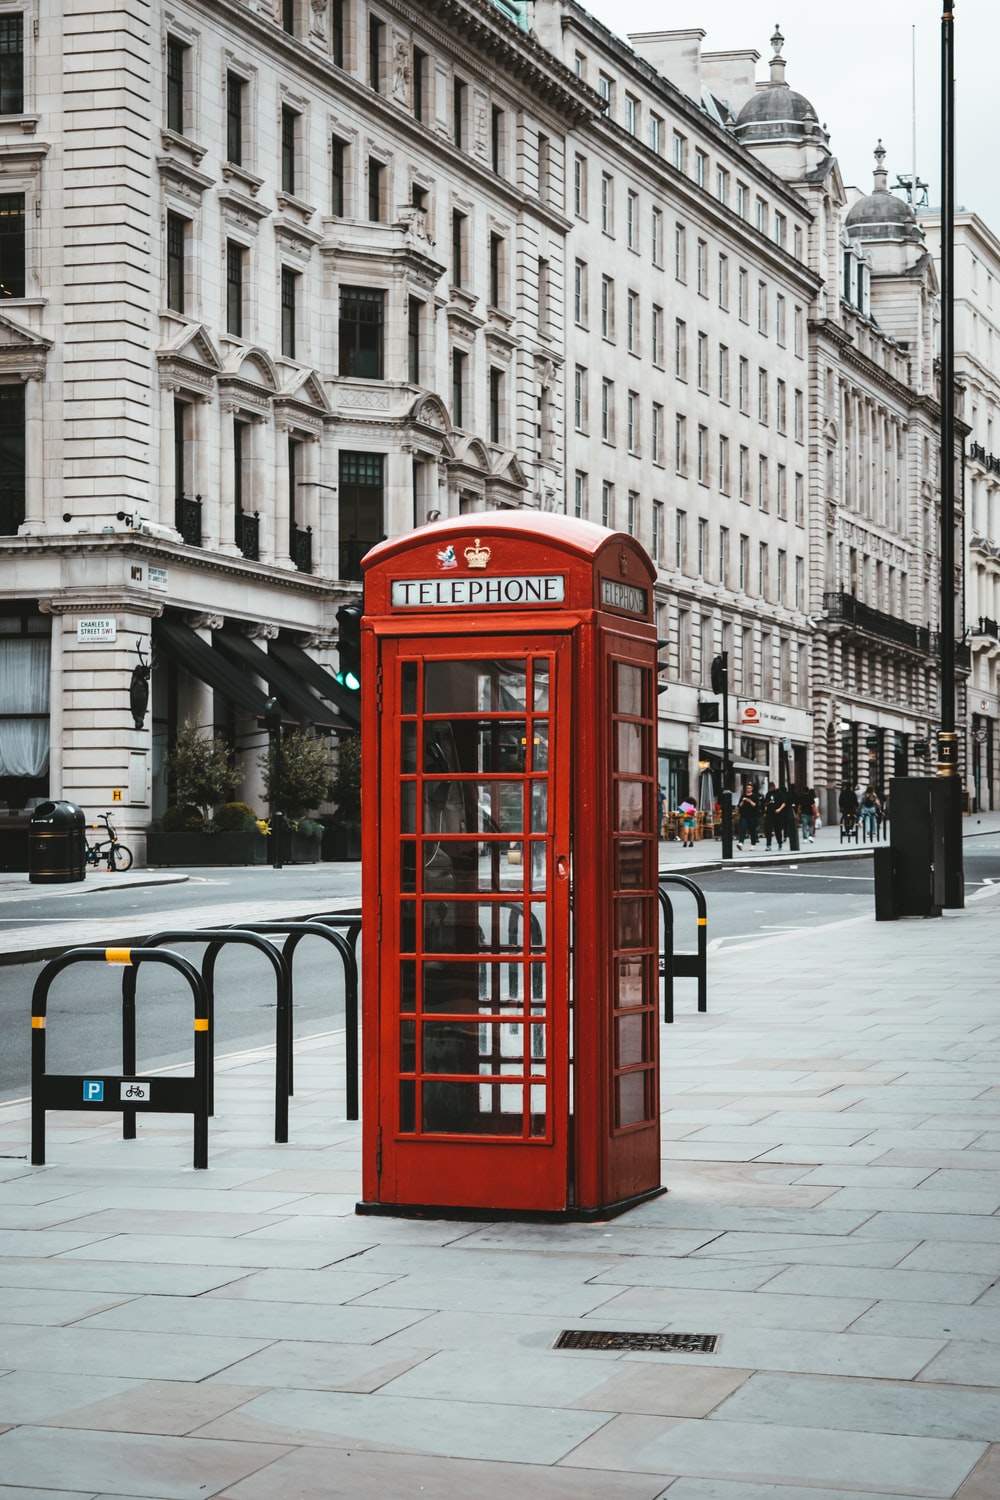 Telephone Booth Picture. Download Free Image